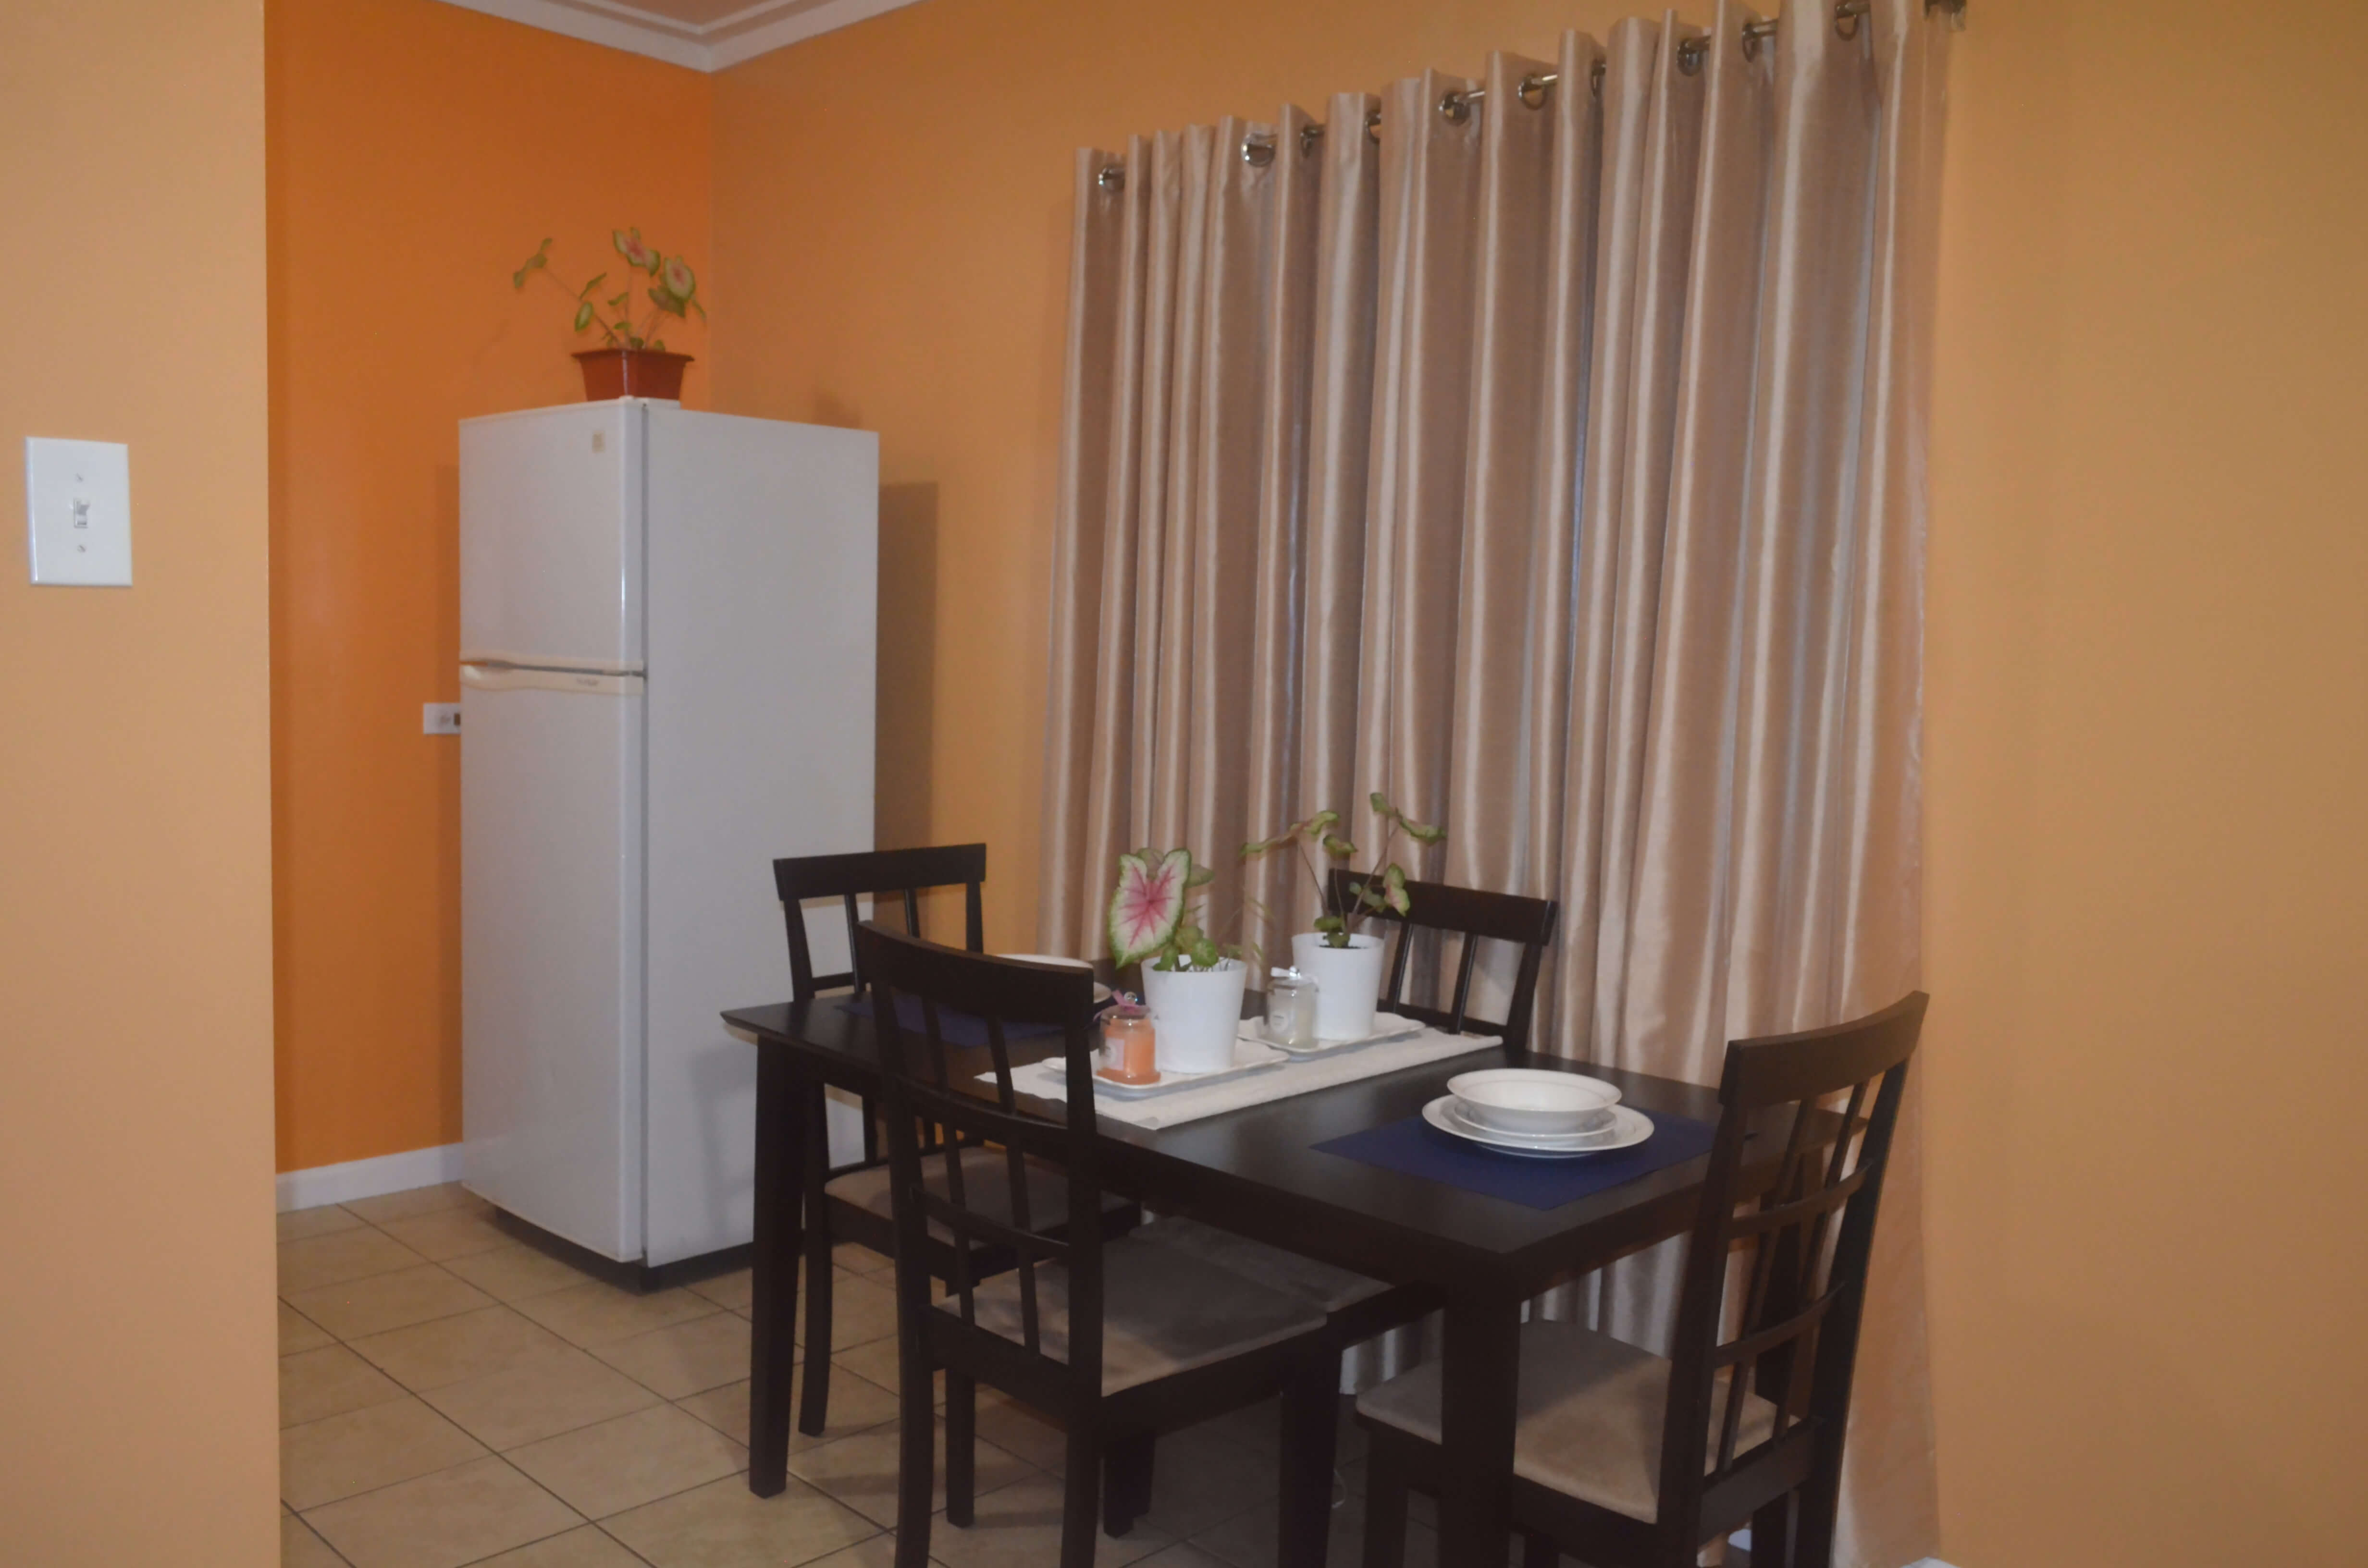 Contact | Apartments in Georgetown, Guyana